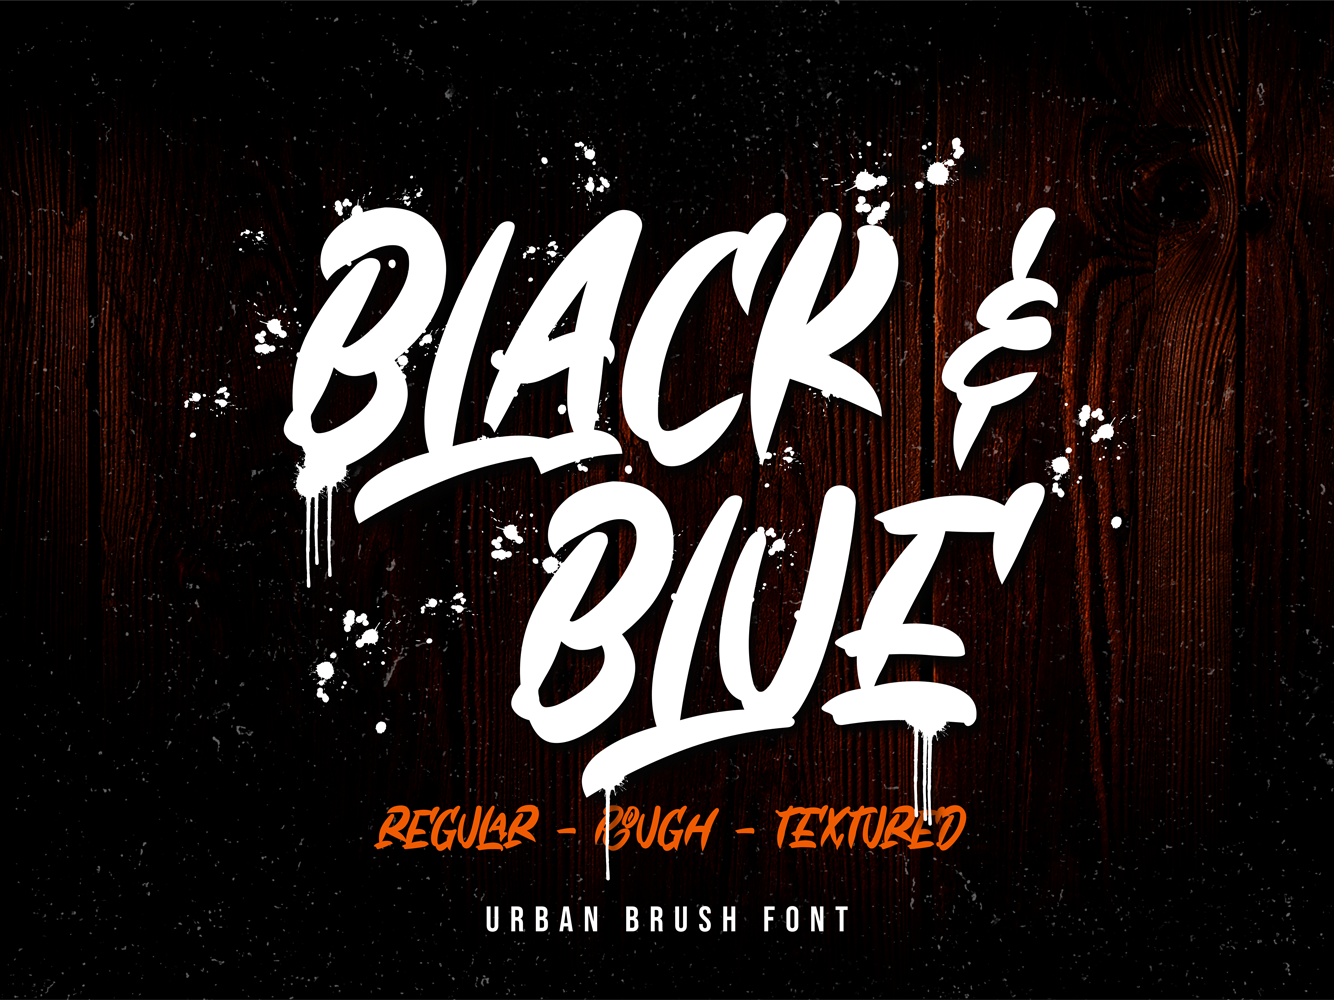 Download Free Black Blue Free Font By Ibnu Utomo On Dribbble Fonts Typography